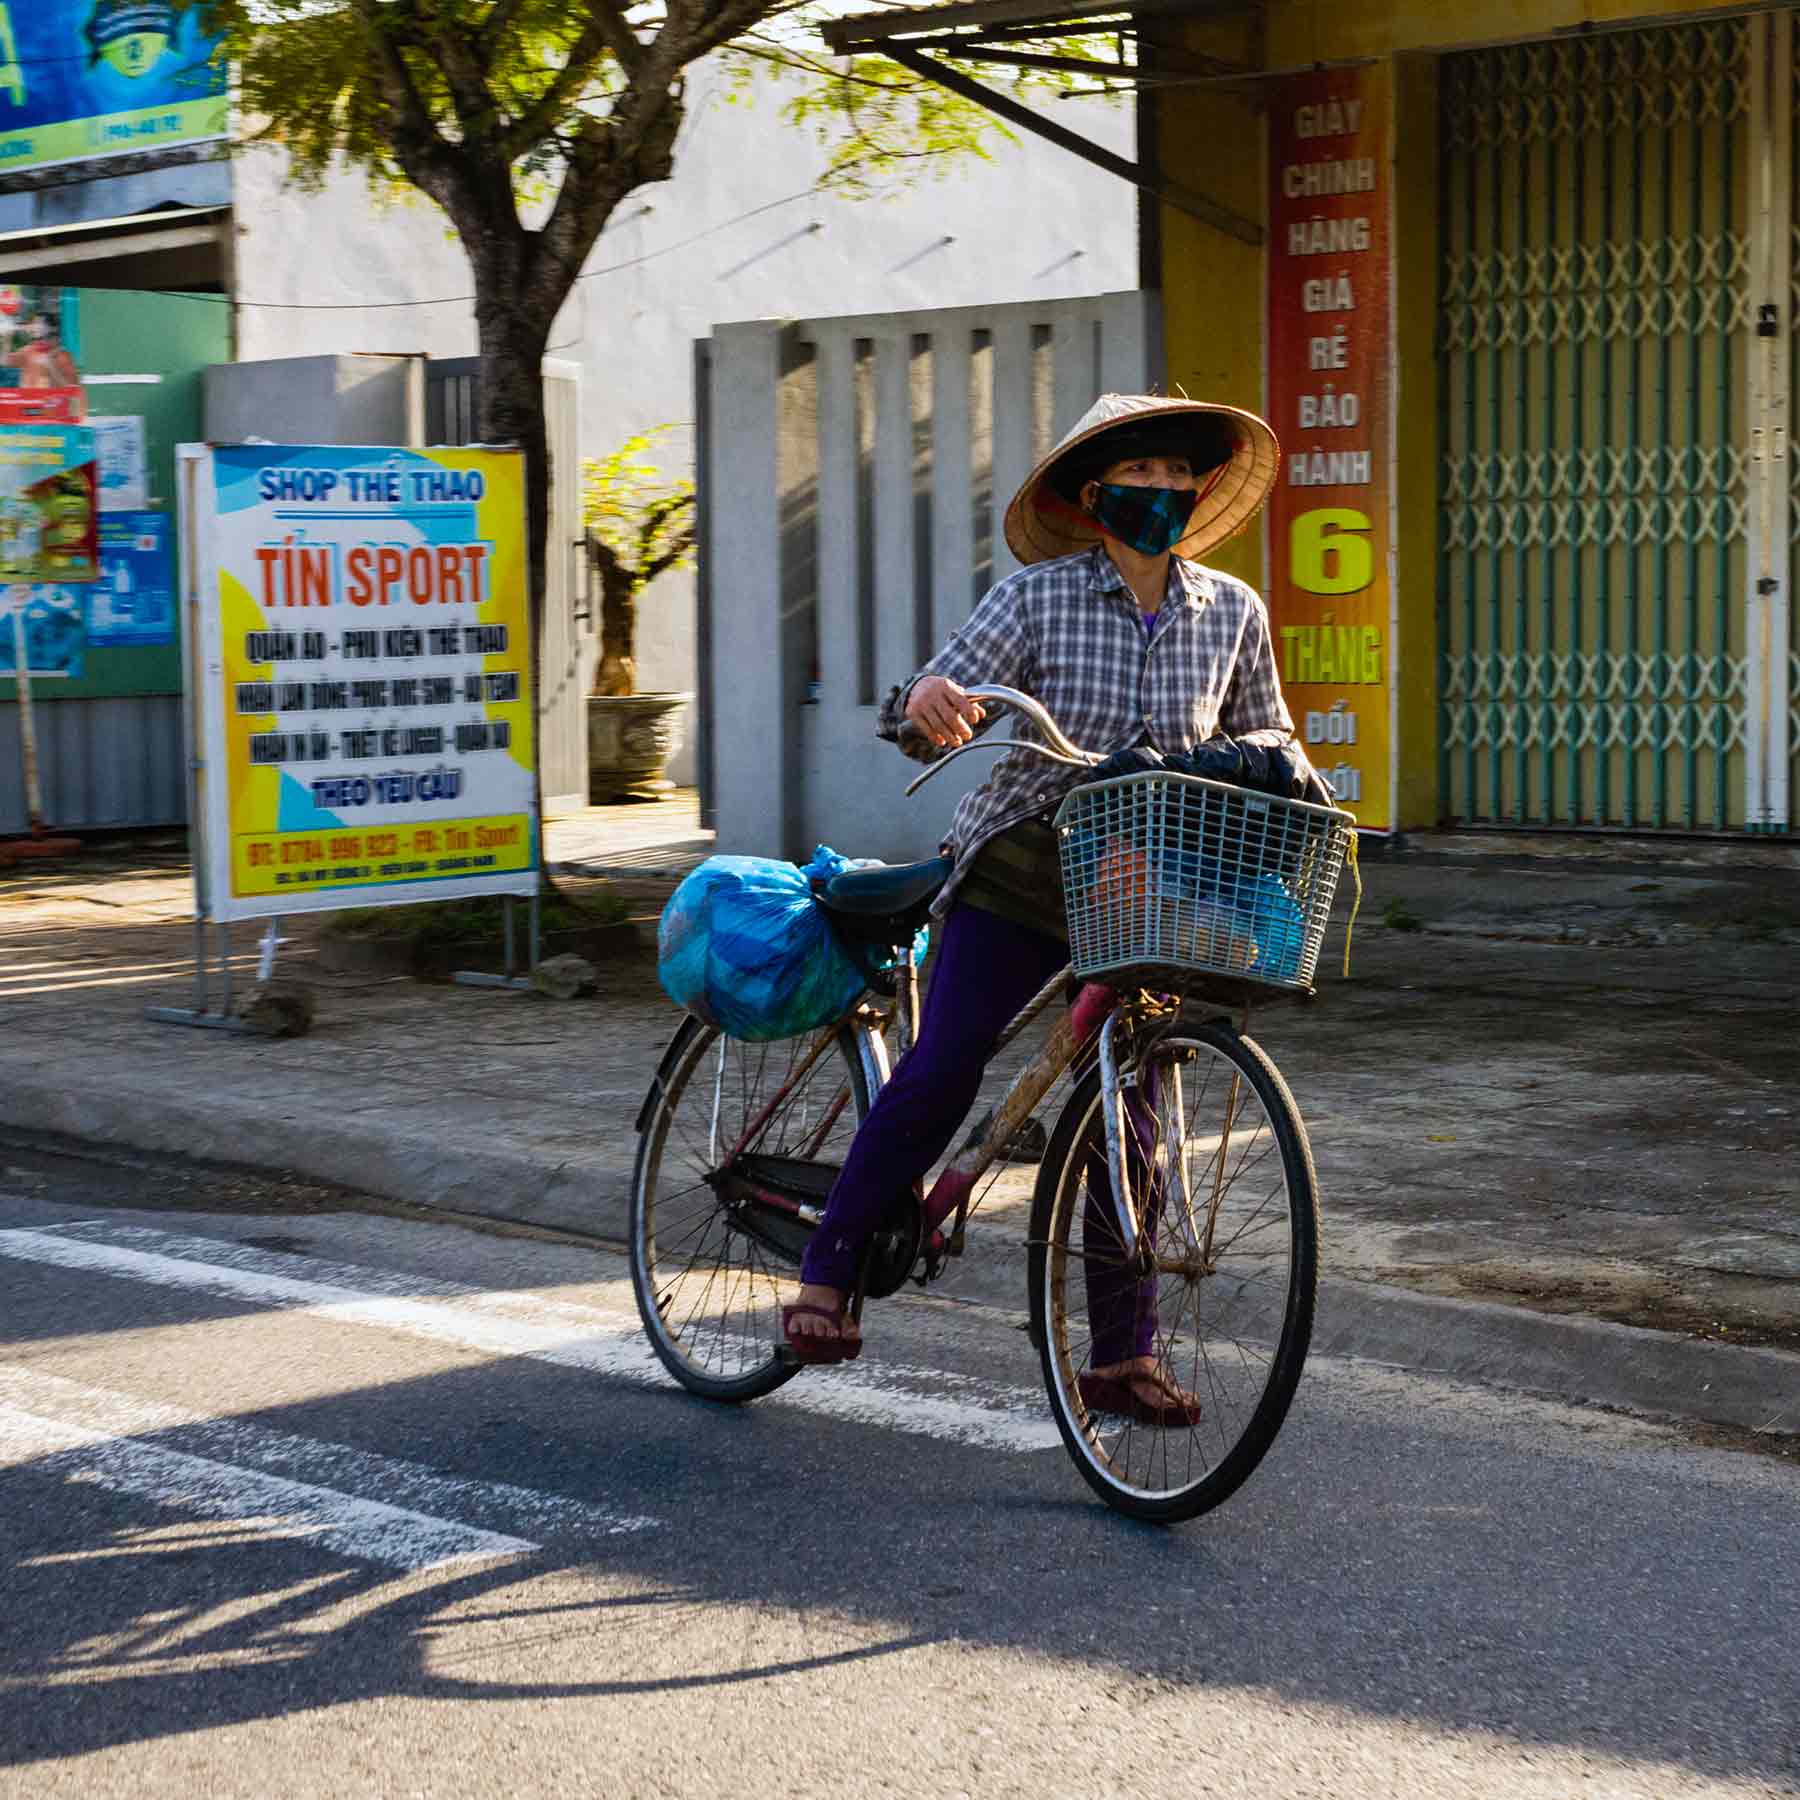 Vietnamese cyclist in traditional attire and face mask navigating a quiet urban street.